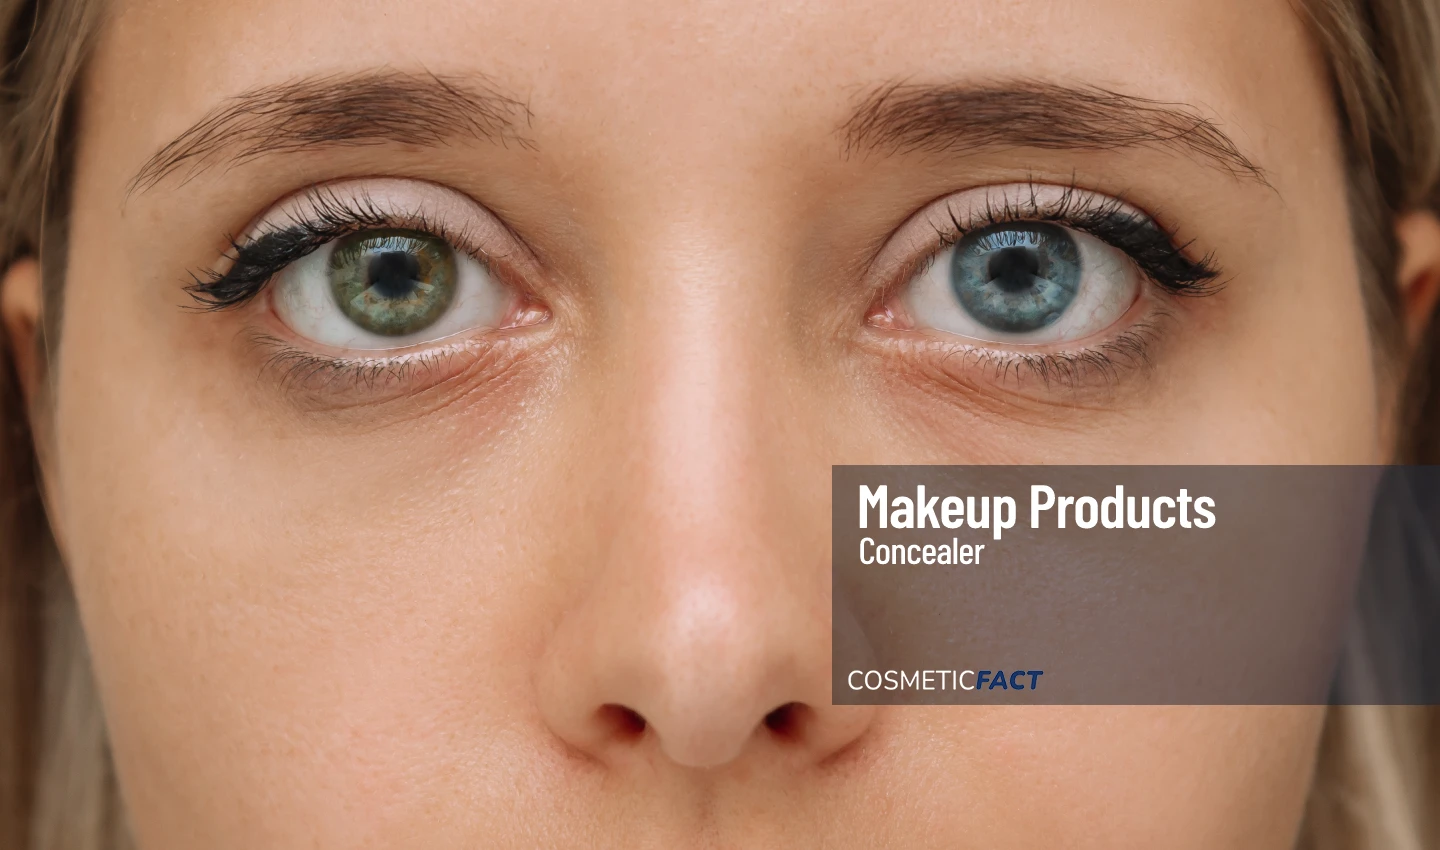 Under-Eye Circles: Close-up of a woman with noticeable dark circles under her eyes